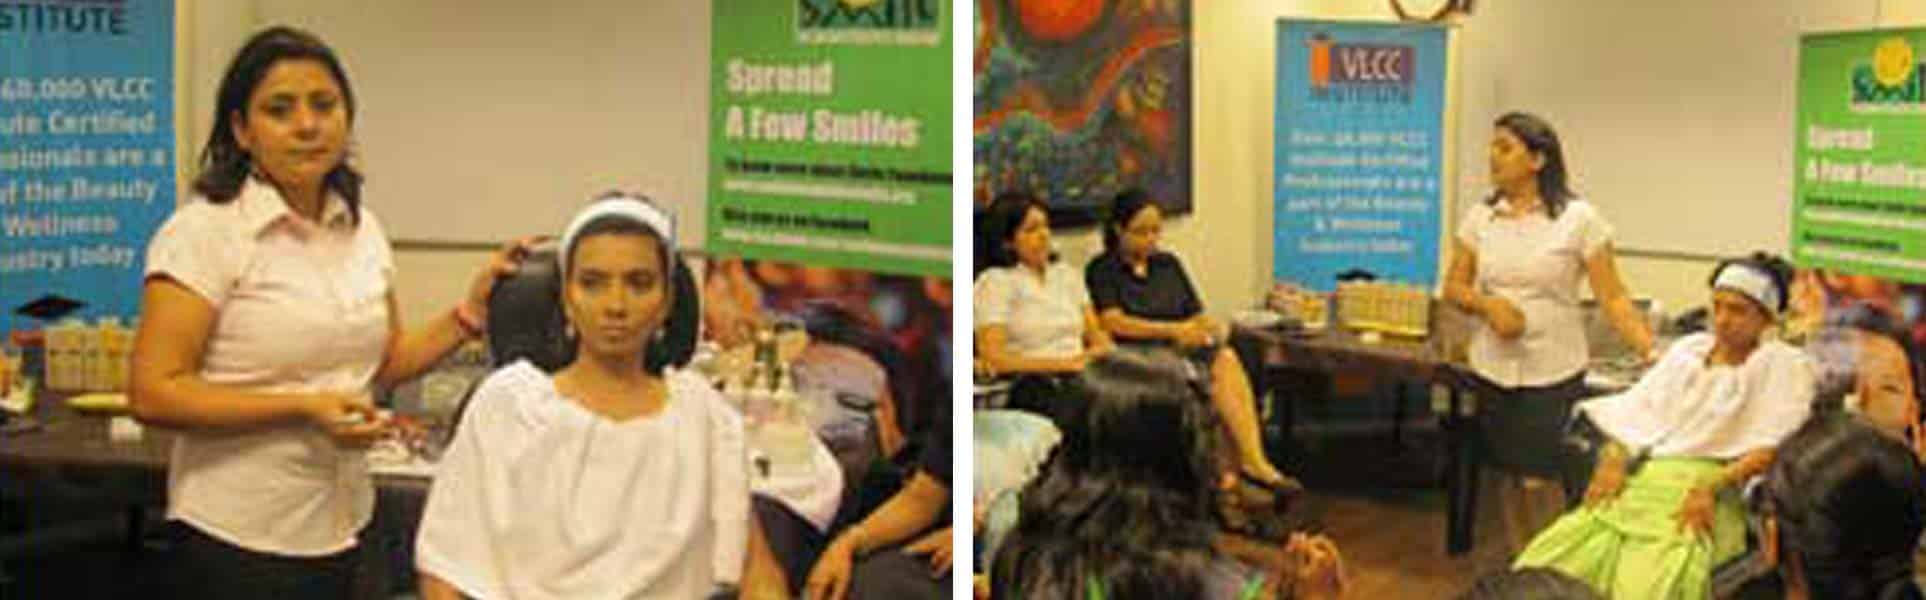 Smile organizes Beauty and Health Management Workshop with VLCC